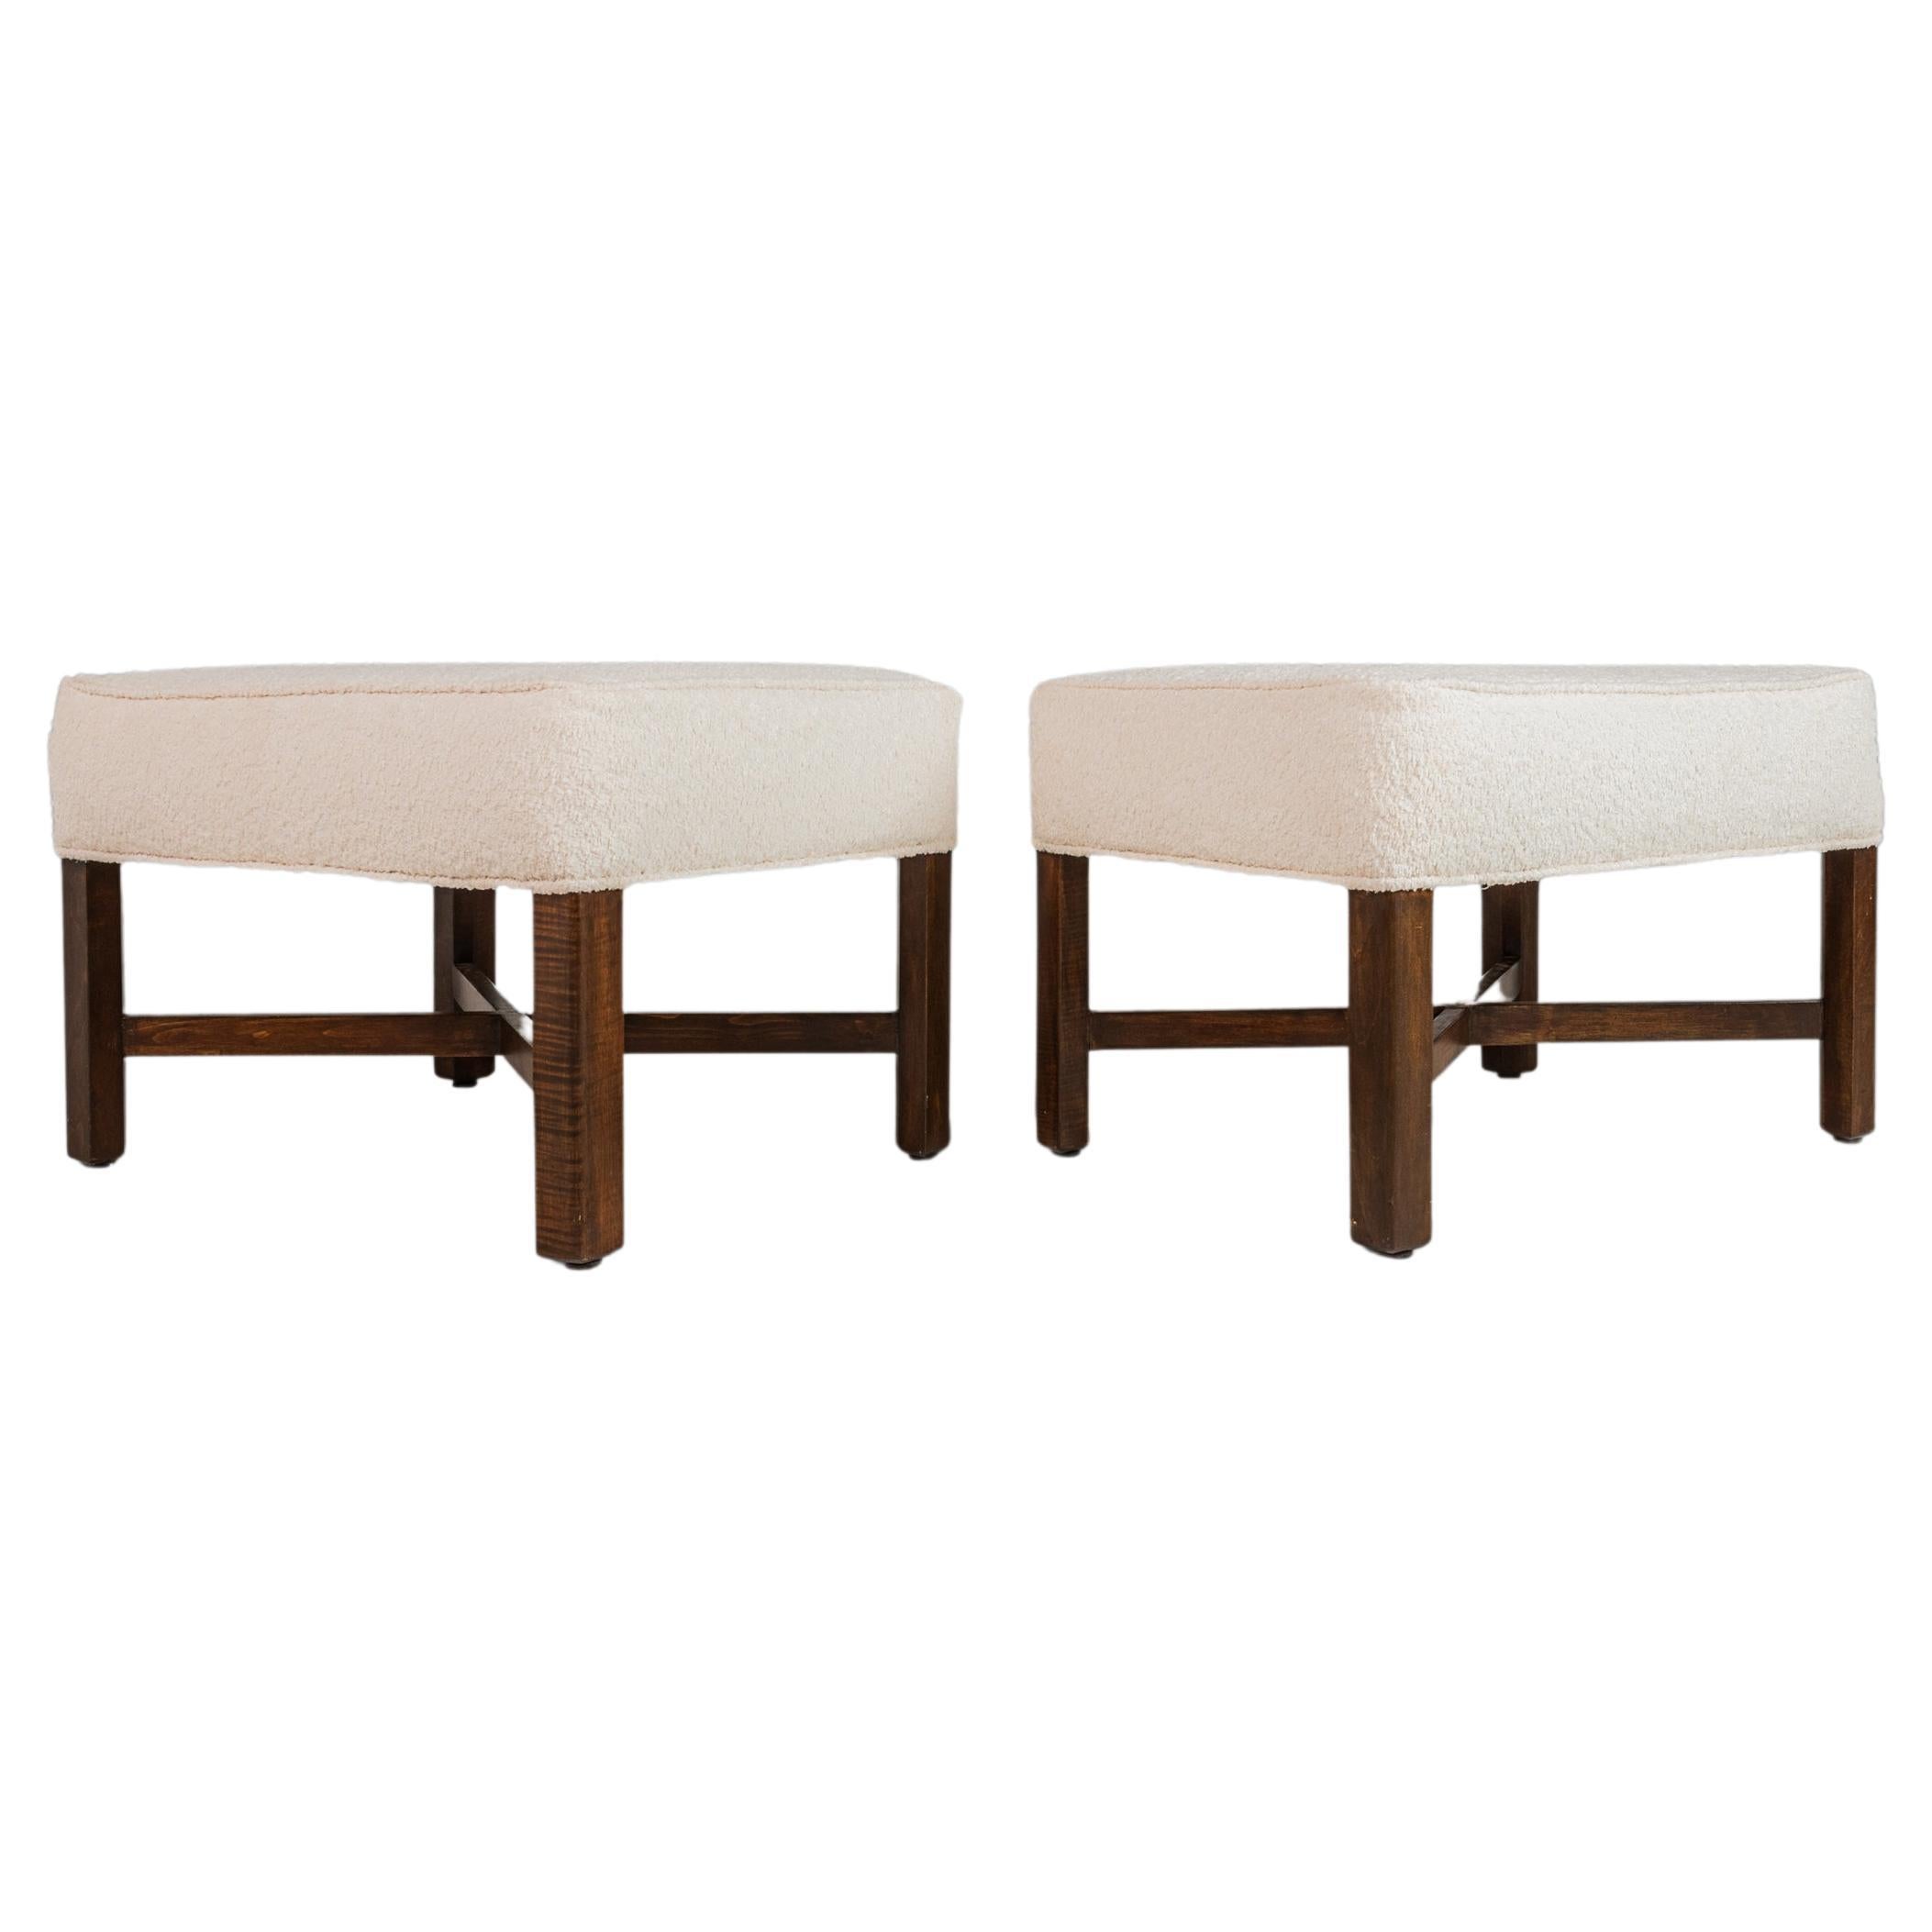 Set of Two '2' Ottomans Footstools After Edward Wormley for Dunbar, USA, 1960s For Sale